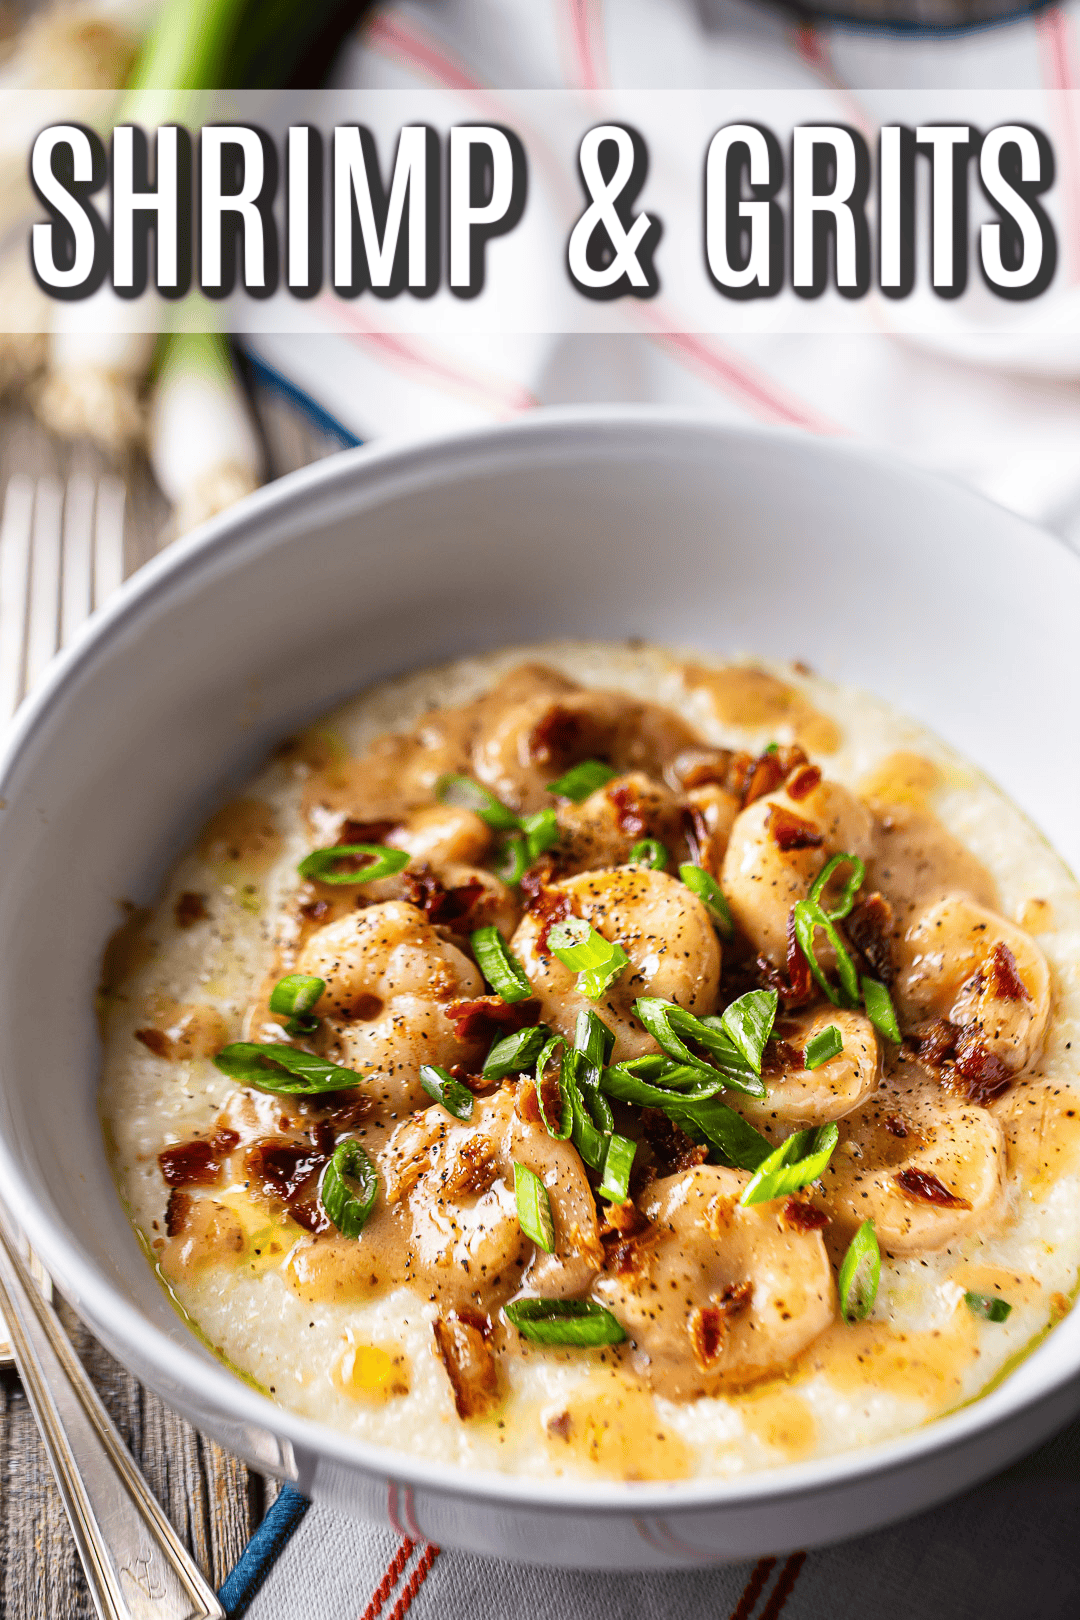 Shrimp and grits recipe, prepared and garnished with bacon and scallions.